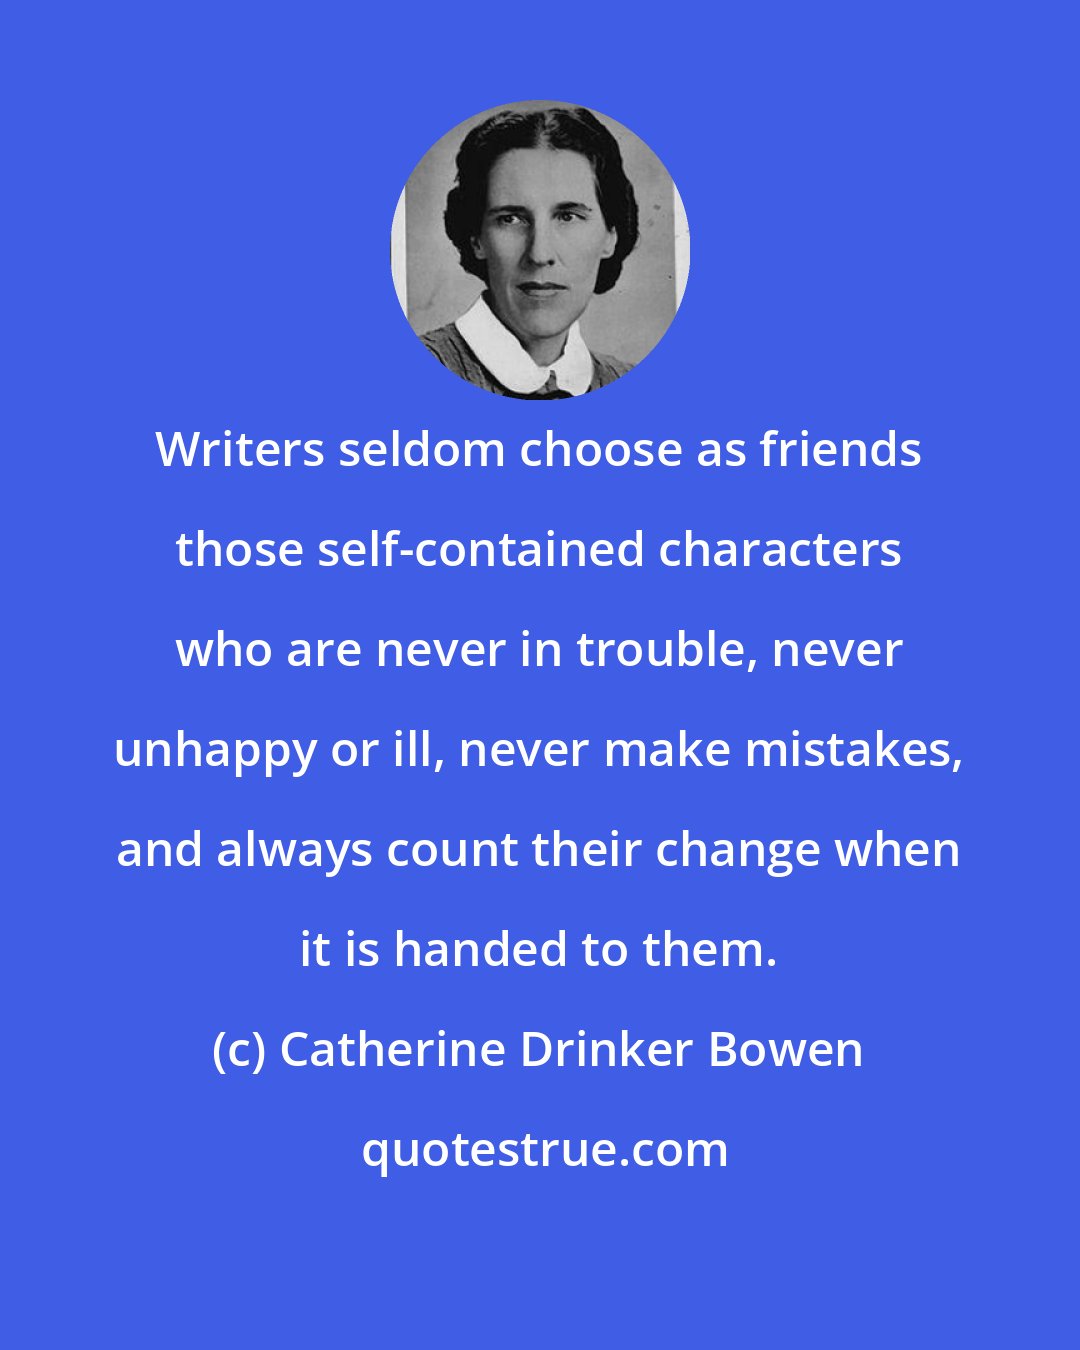 Catherine Drinker Bowen: Writers seldom choose as friends those self-contained characters who are never in trouble, never unhappy or ill, never make mistakes, and always count their change when it is handed to them.